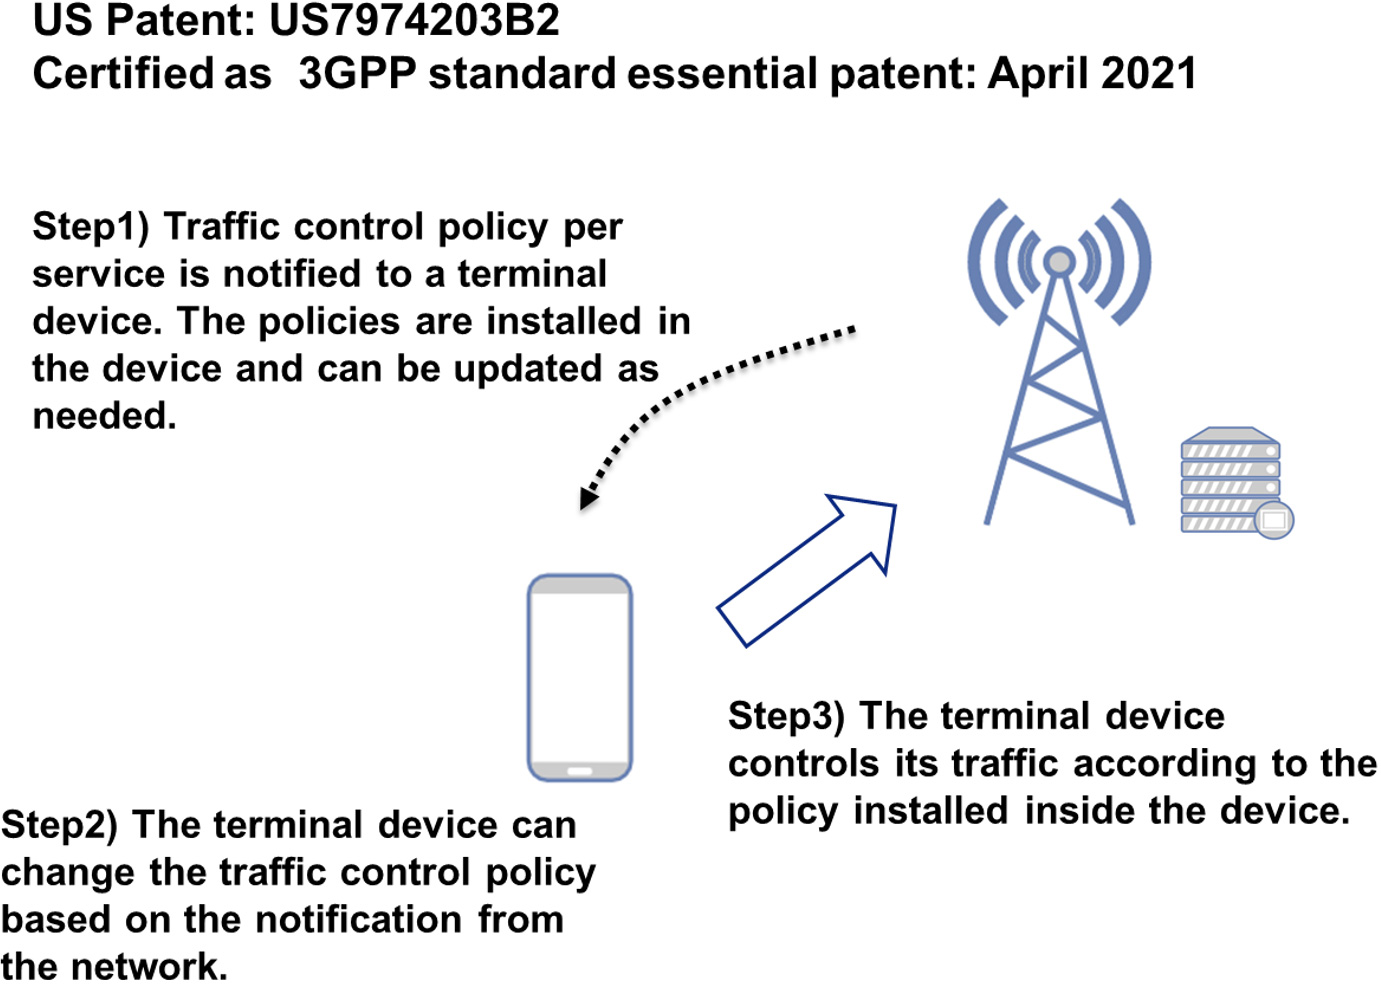 Fig.1 Overview of the traffic control technology where the terminal device works in cooperation with the network